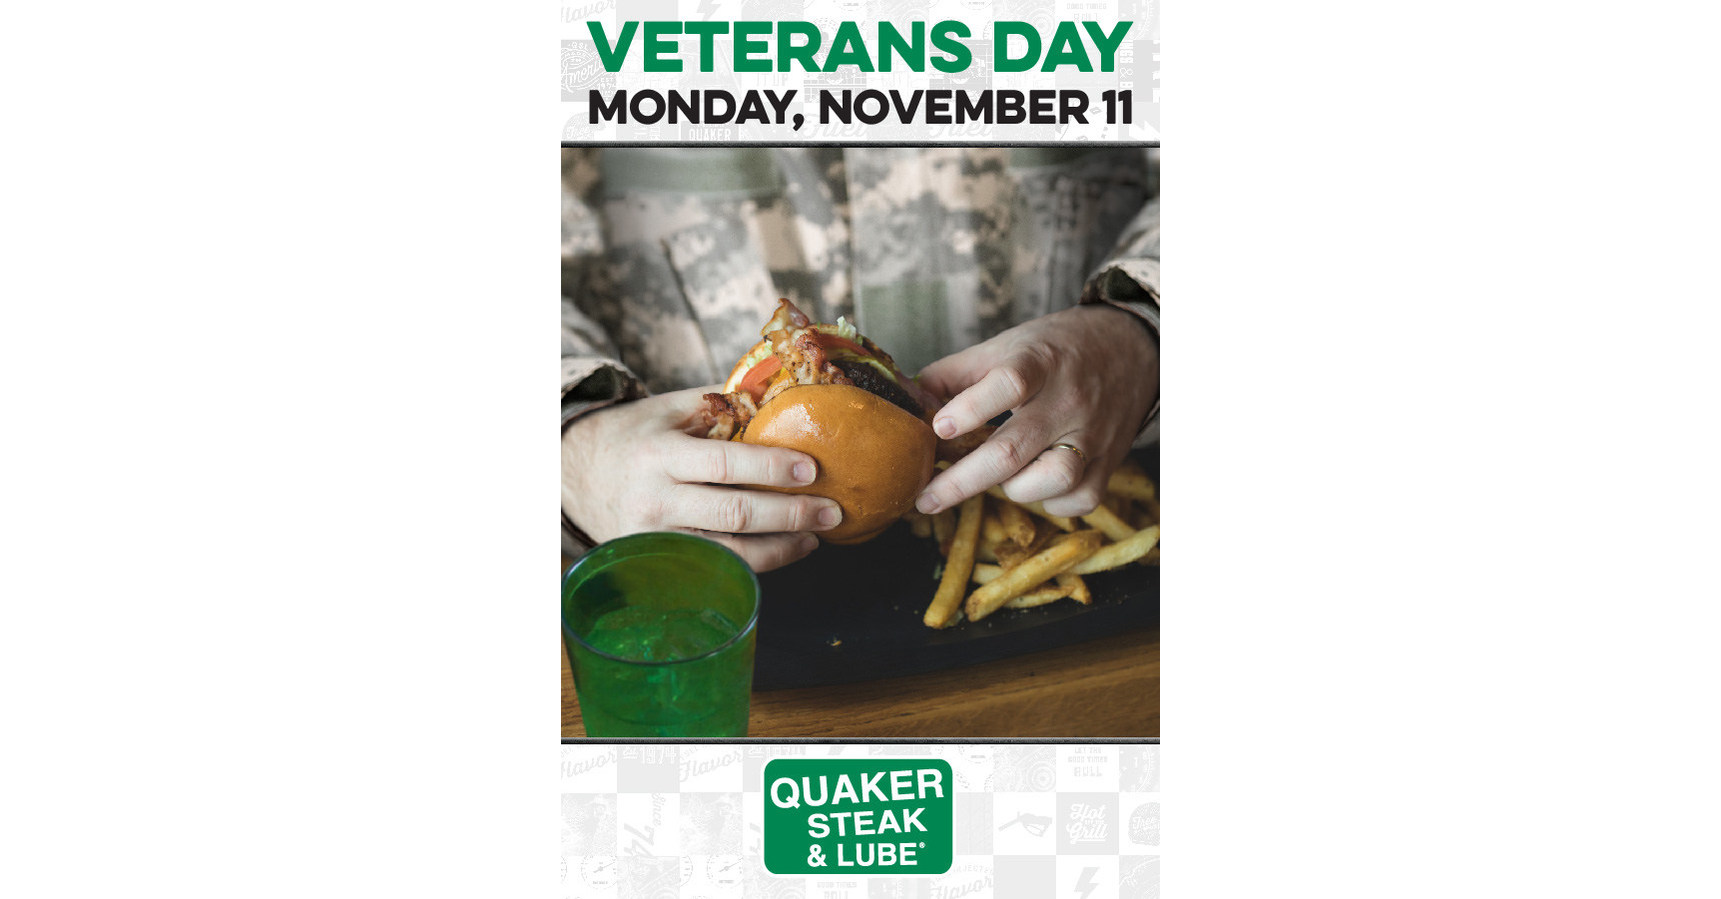 Veterans and ActiveDuty Military Offered Free Meal at Quaker Steak